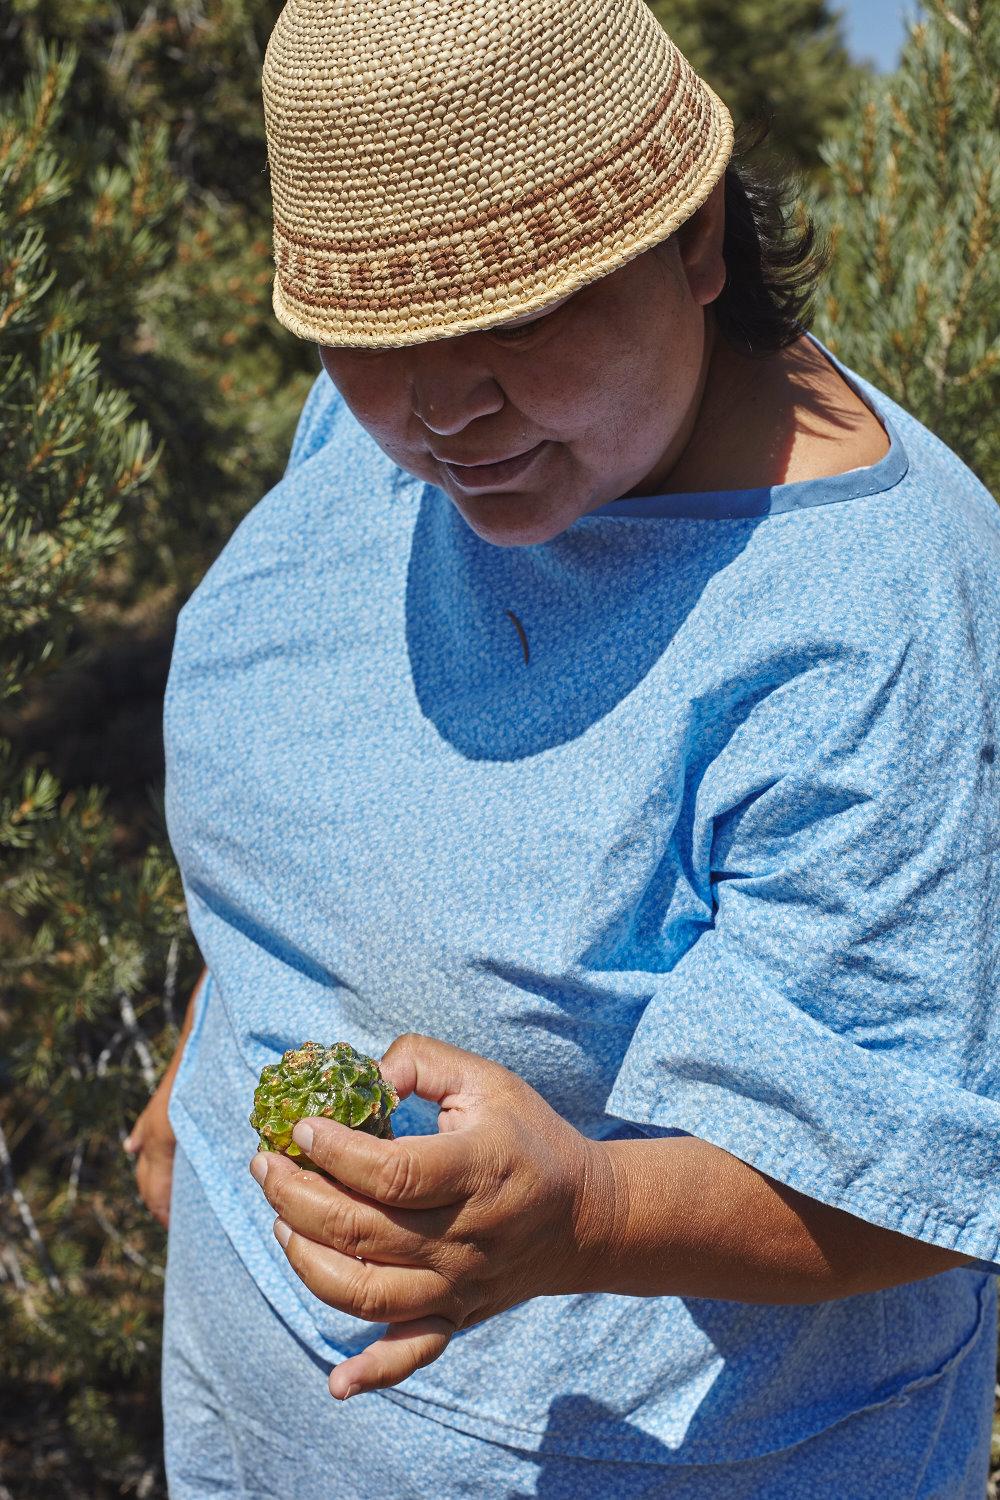 Traditional Shoshone Pine Nut Harvesting in the Age of Climate Change